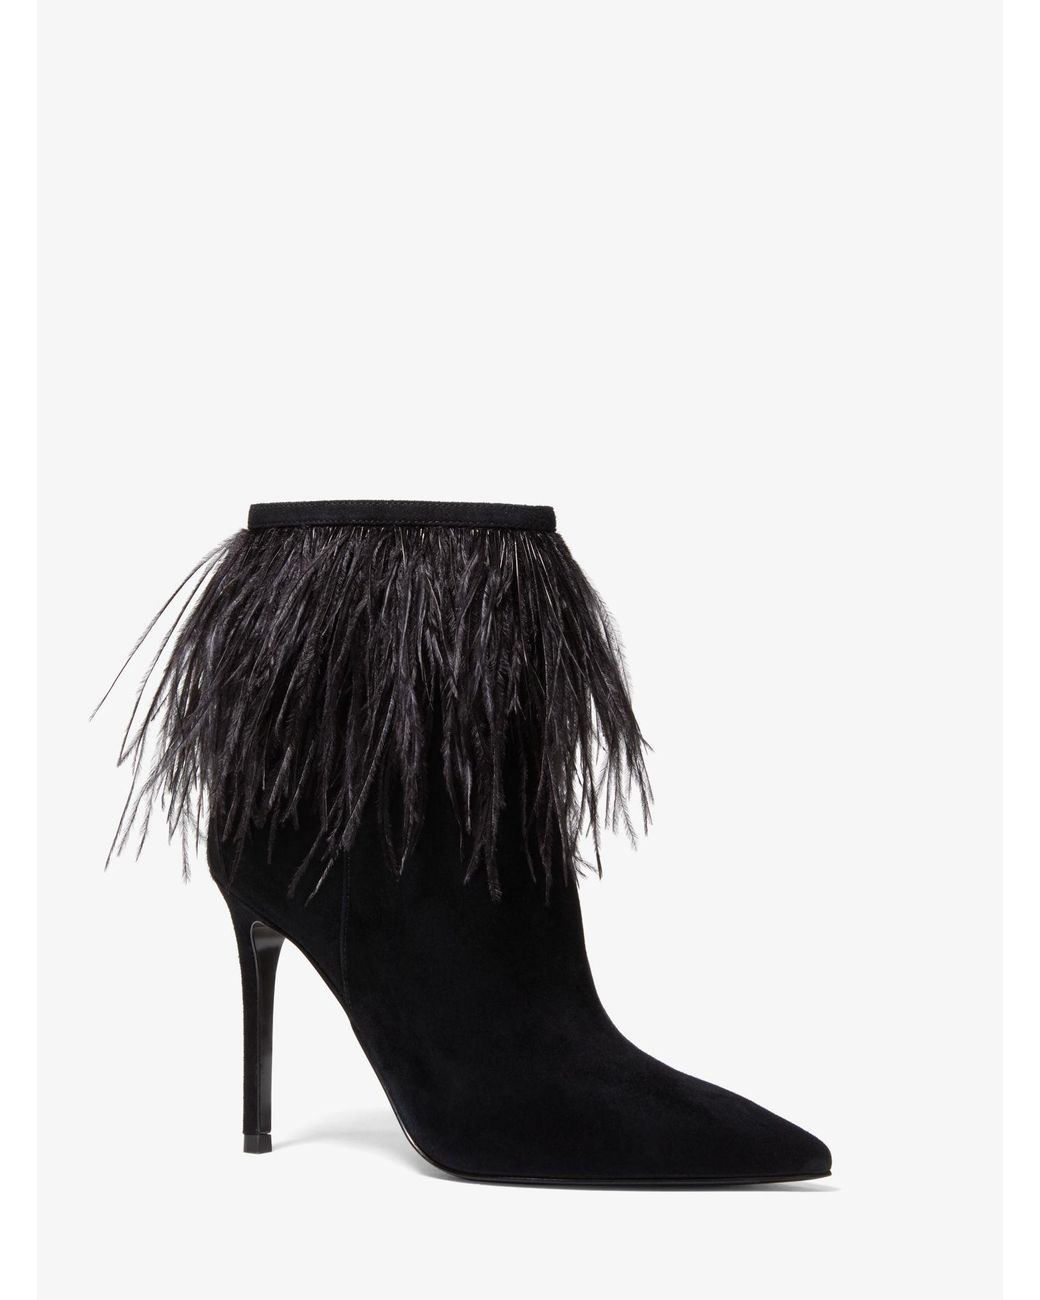 Michael Kors Meena Feather Embellished Suede Ankle Boot in Black | Lyst